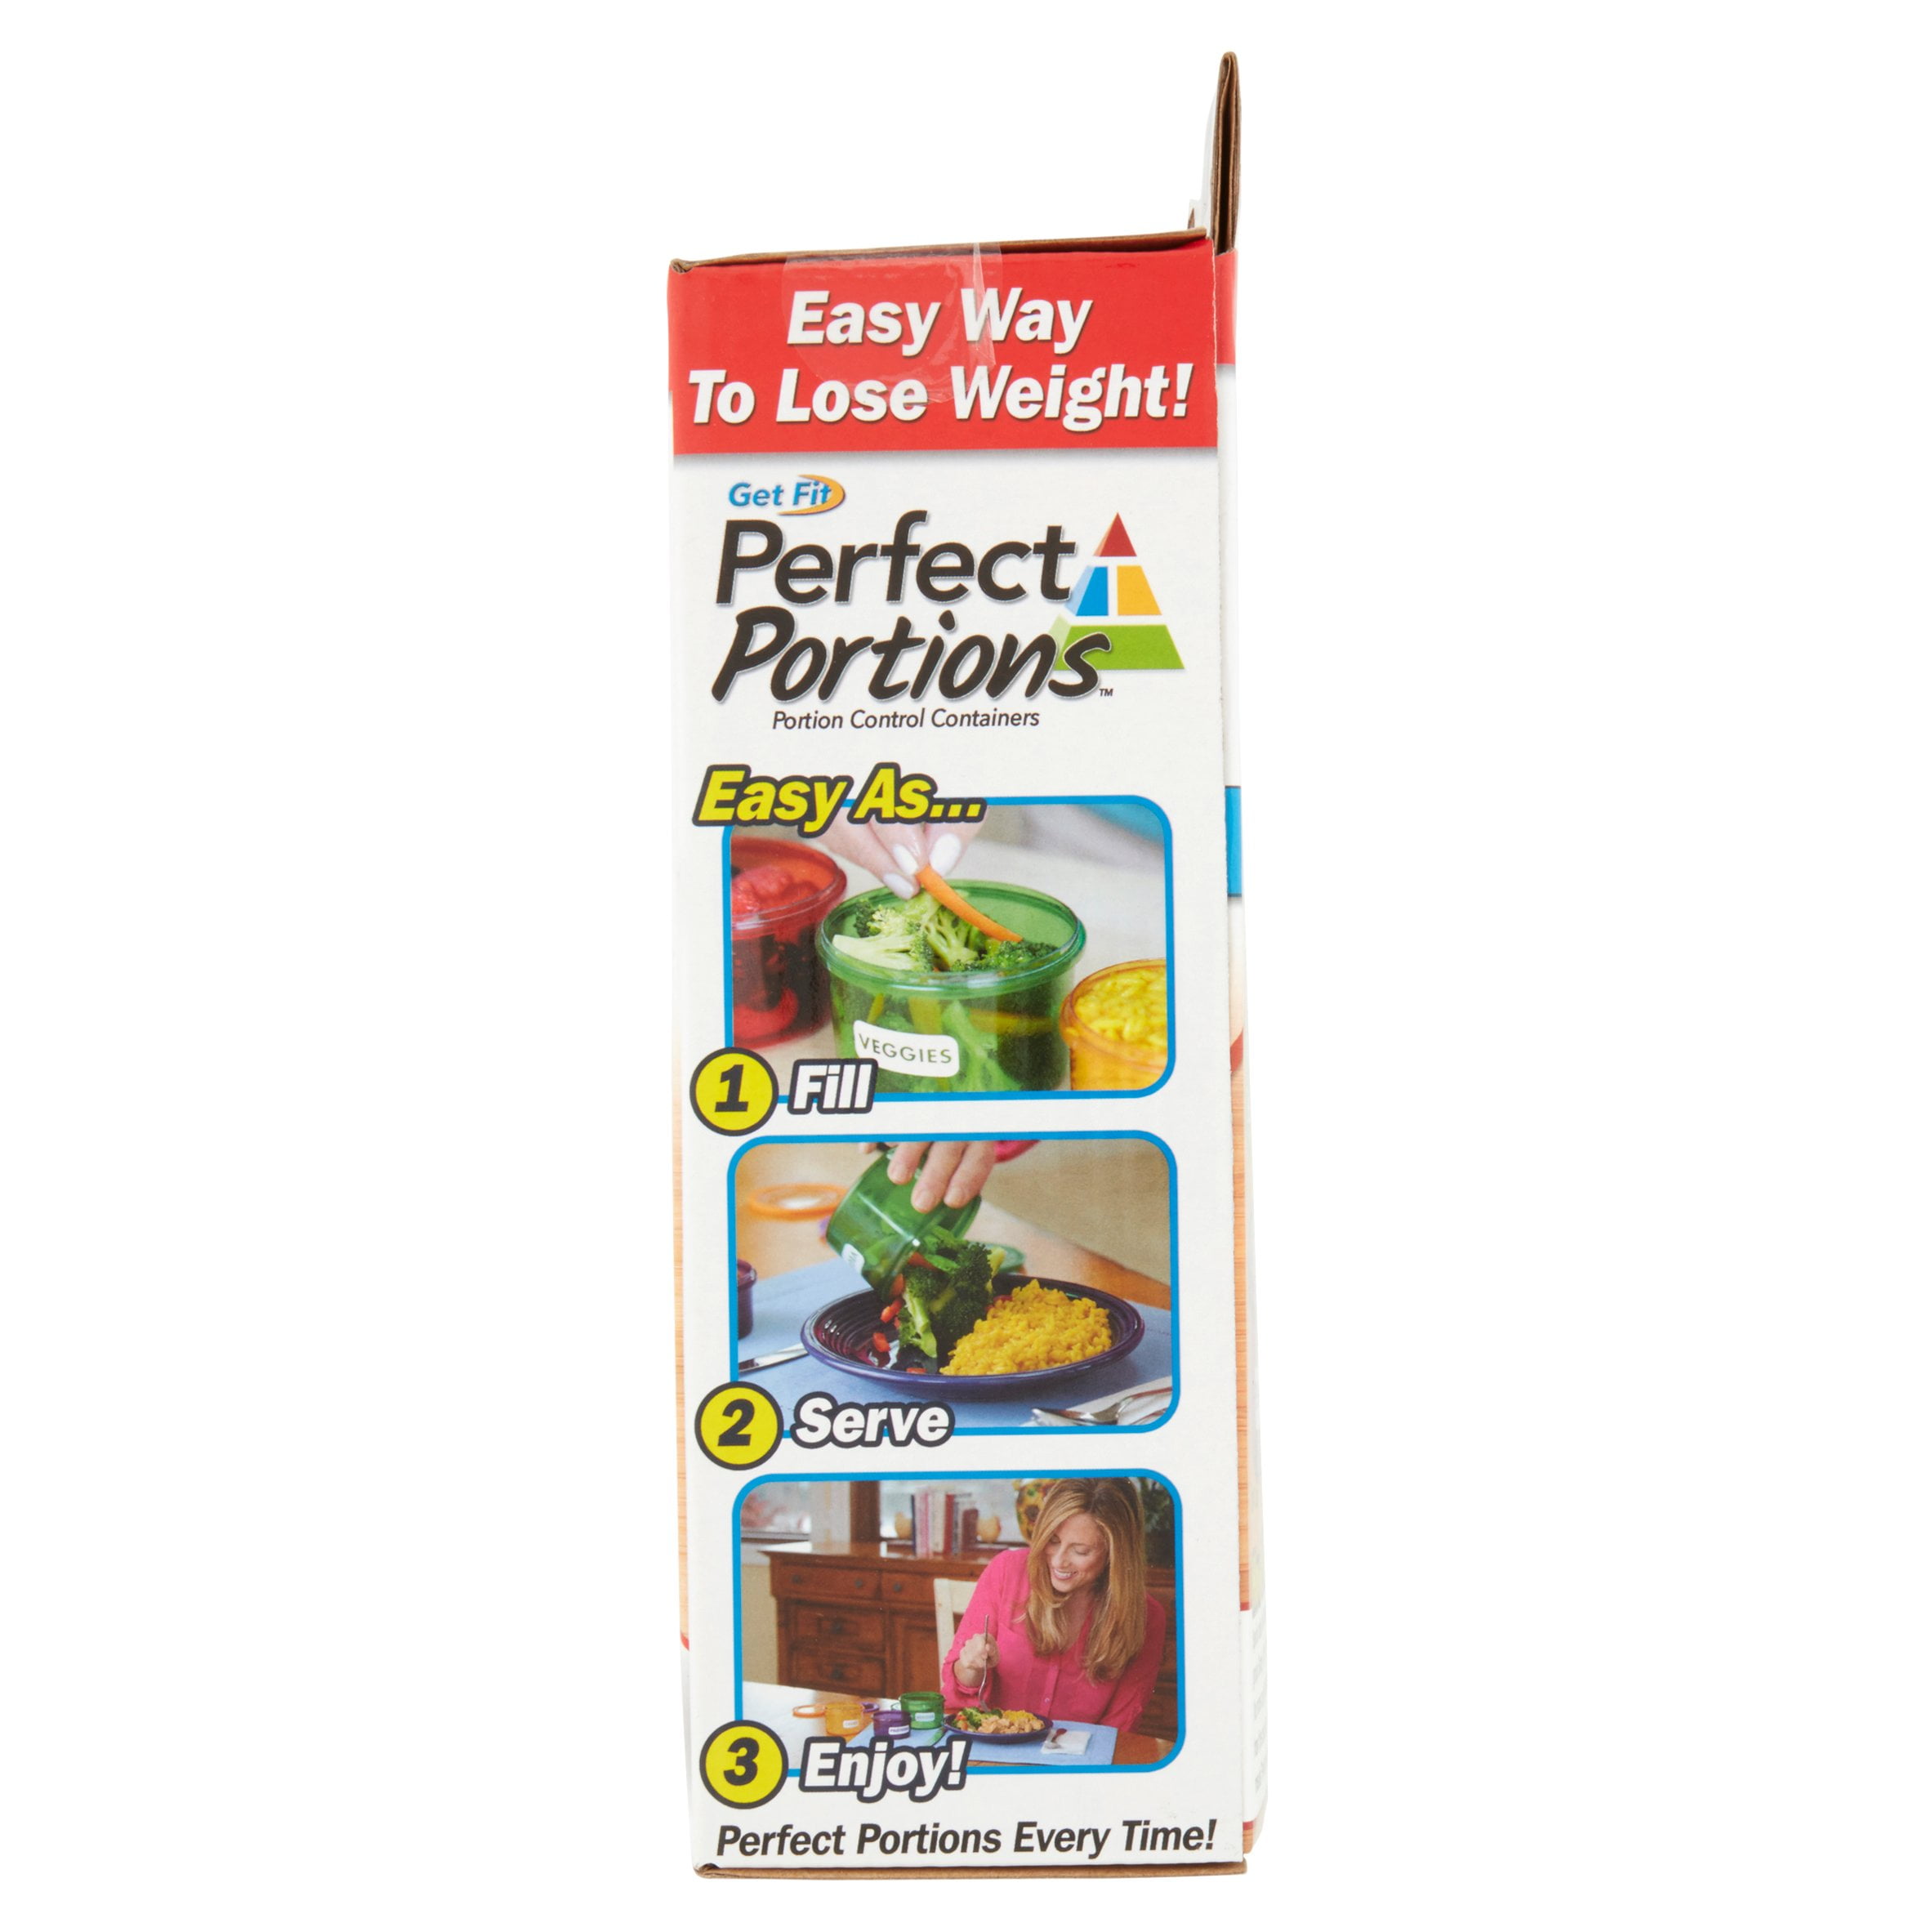 Get Fit Perfect Portions - As Seen on TV